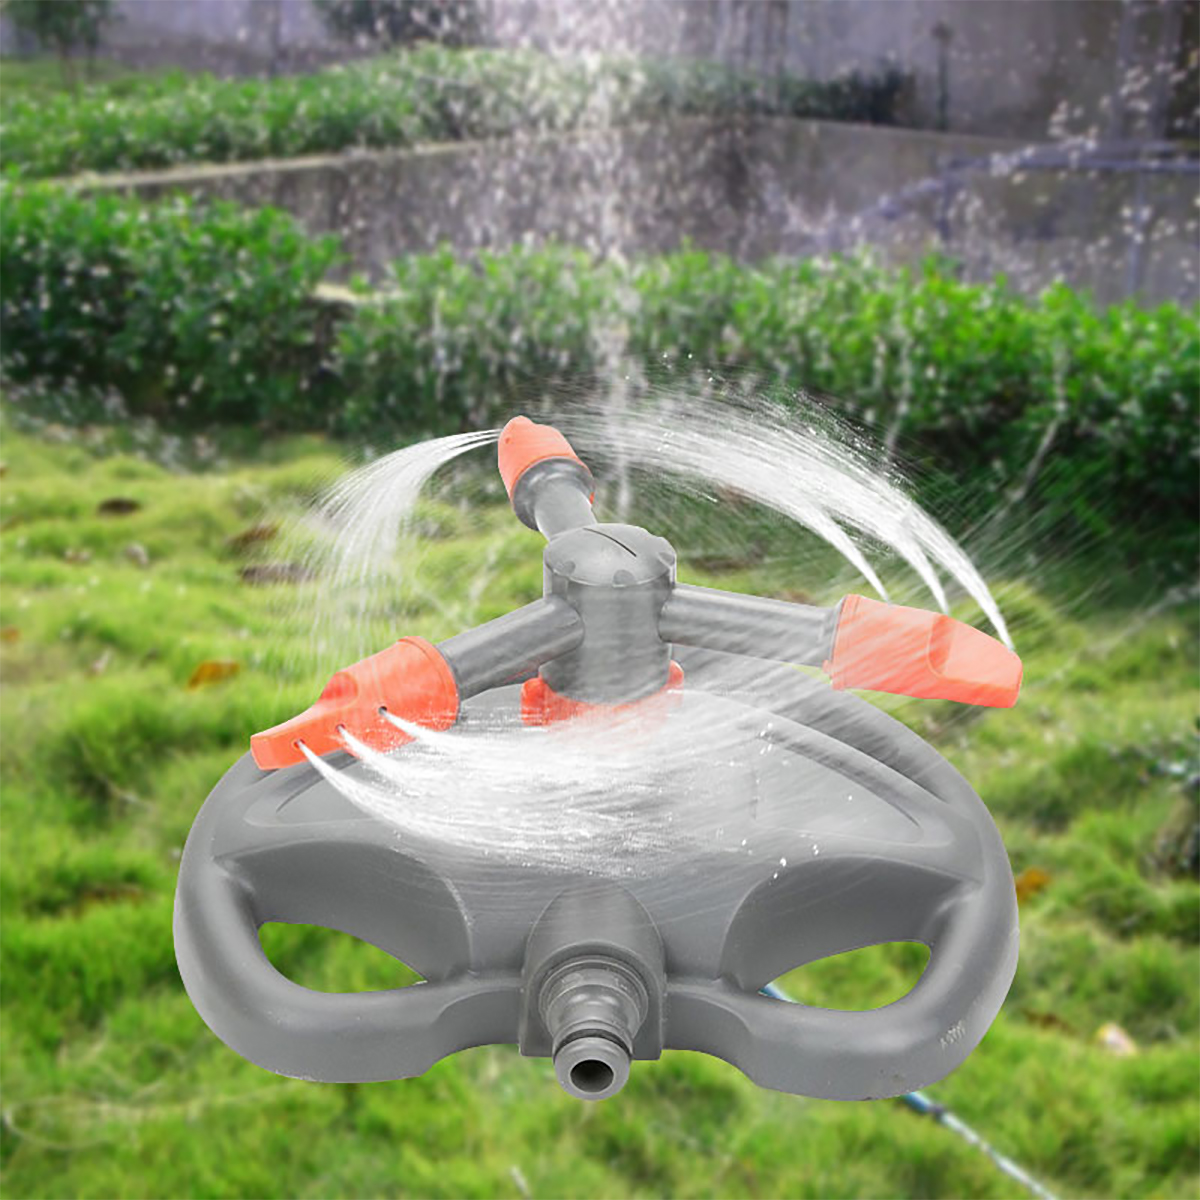 Gardening-Watering-Tool-360deg-Rotating-Sprinklers-Automatic-Watering-Grass-Lawn-Fully-3-Nozzle-Circ-1700837